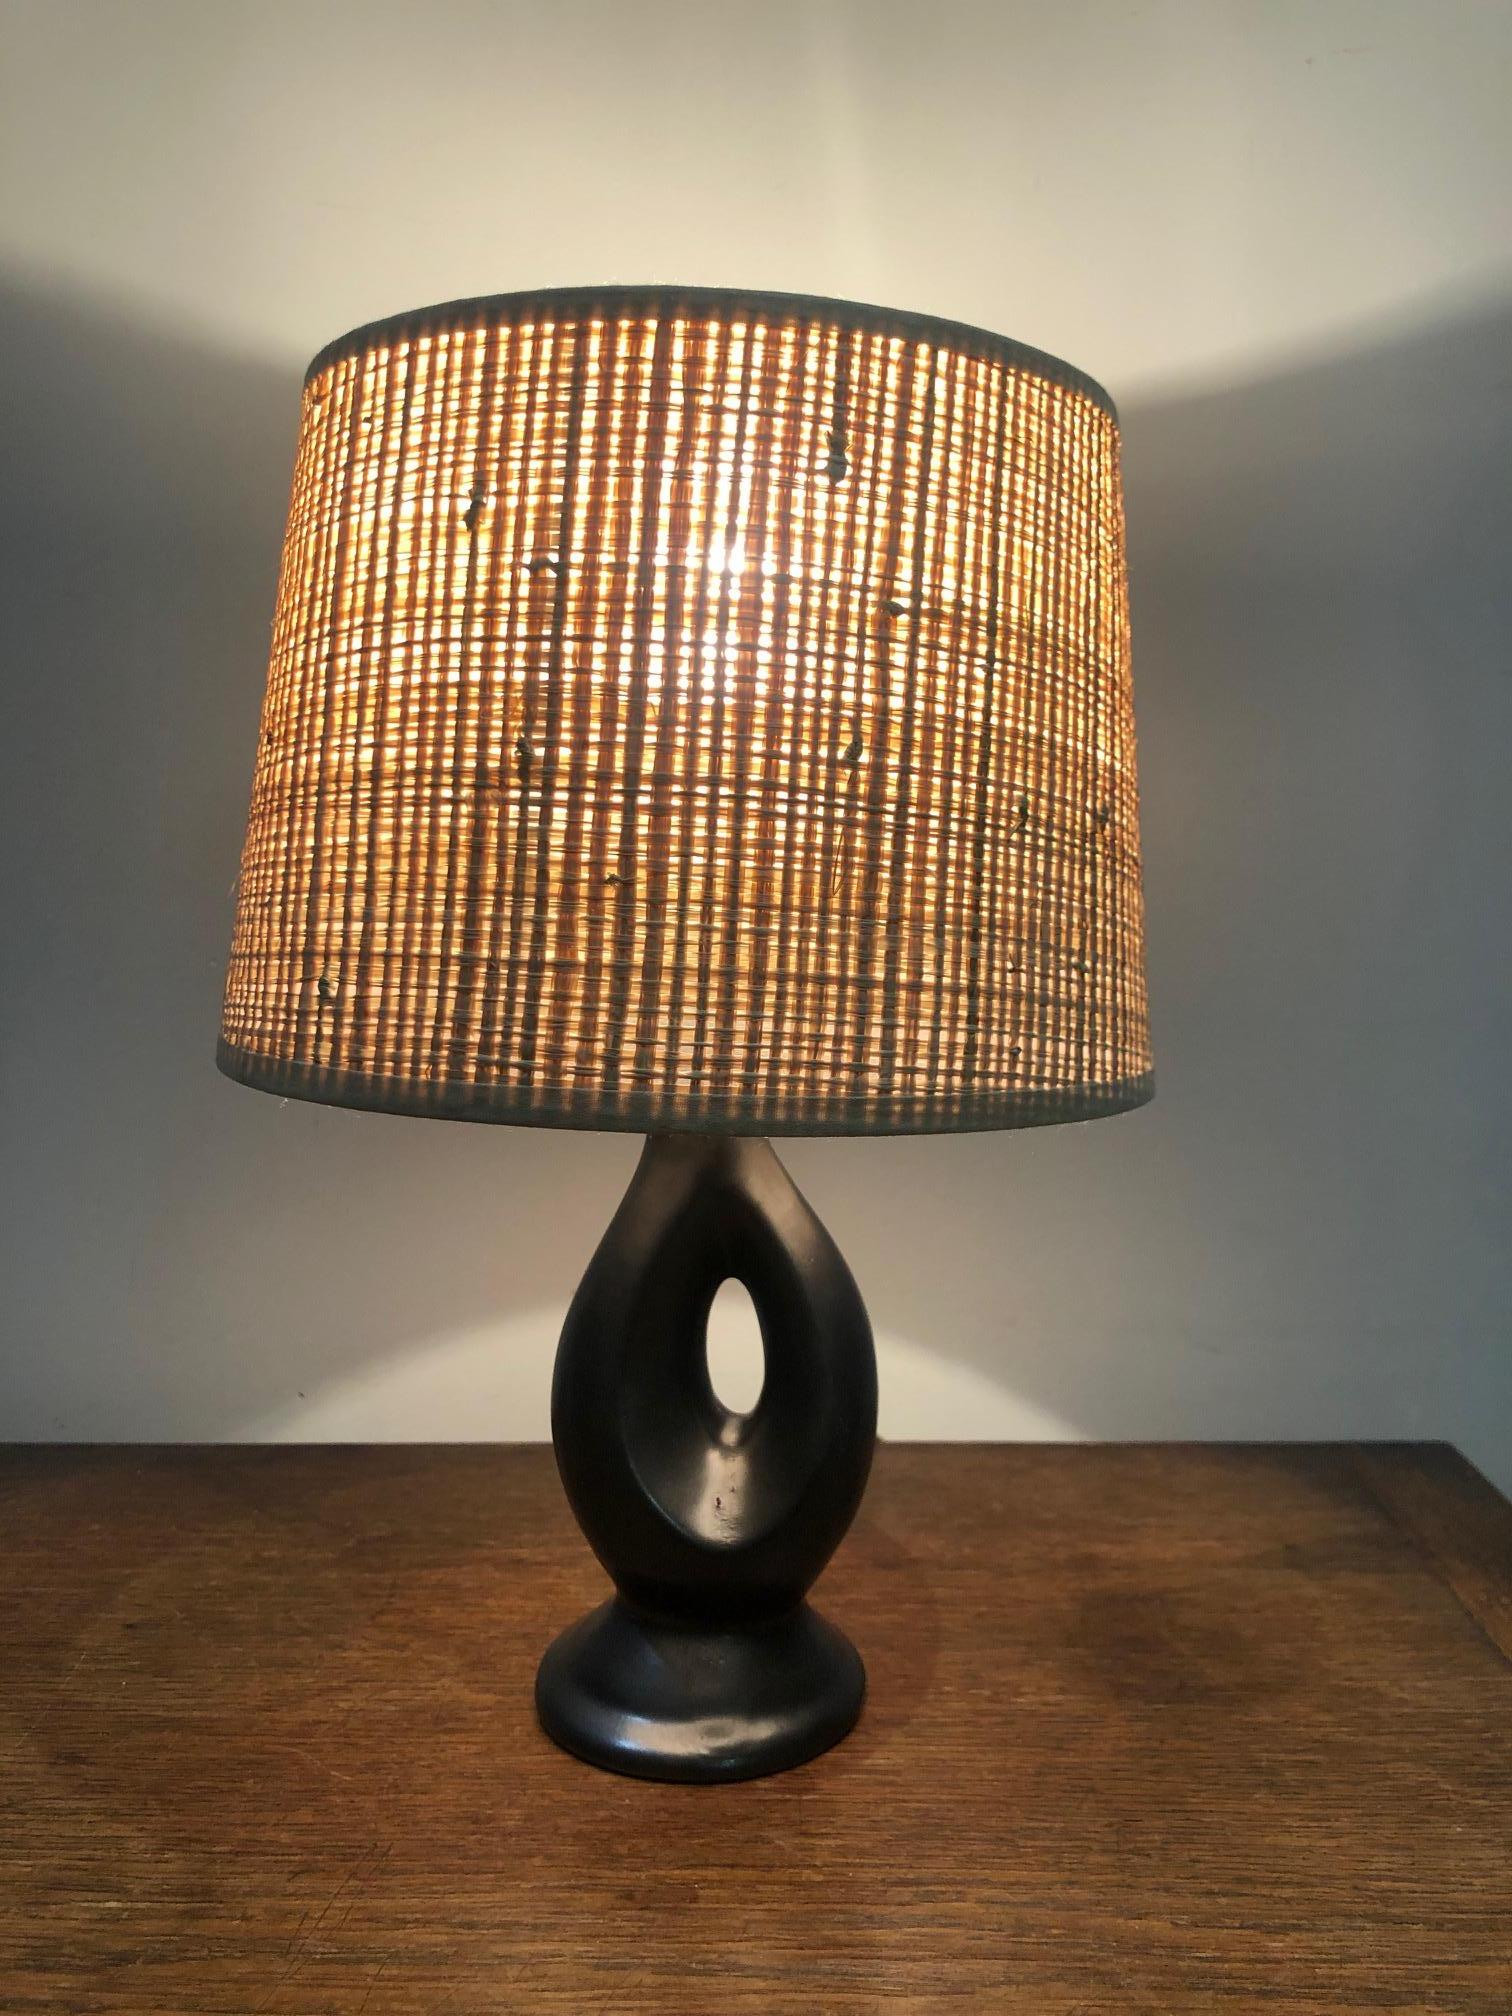 French Ceramic Table Lamp from the 1950s